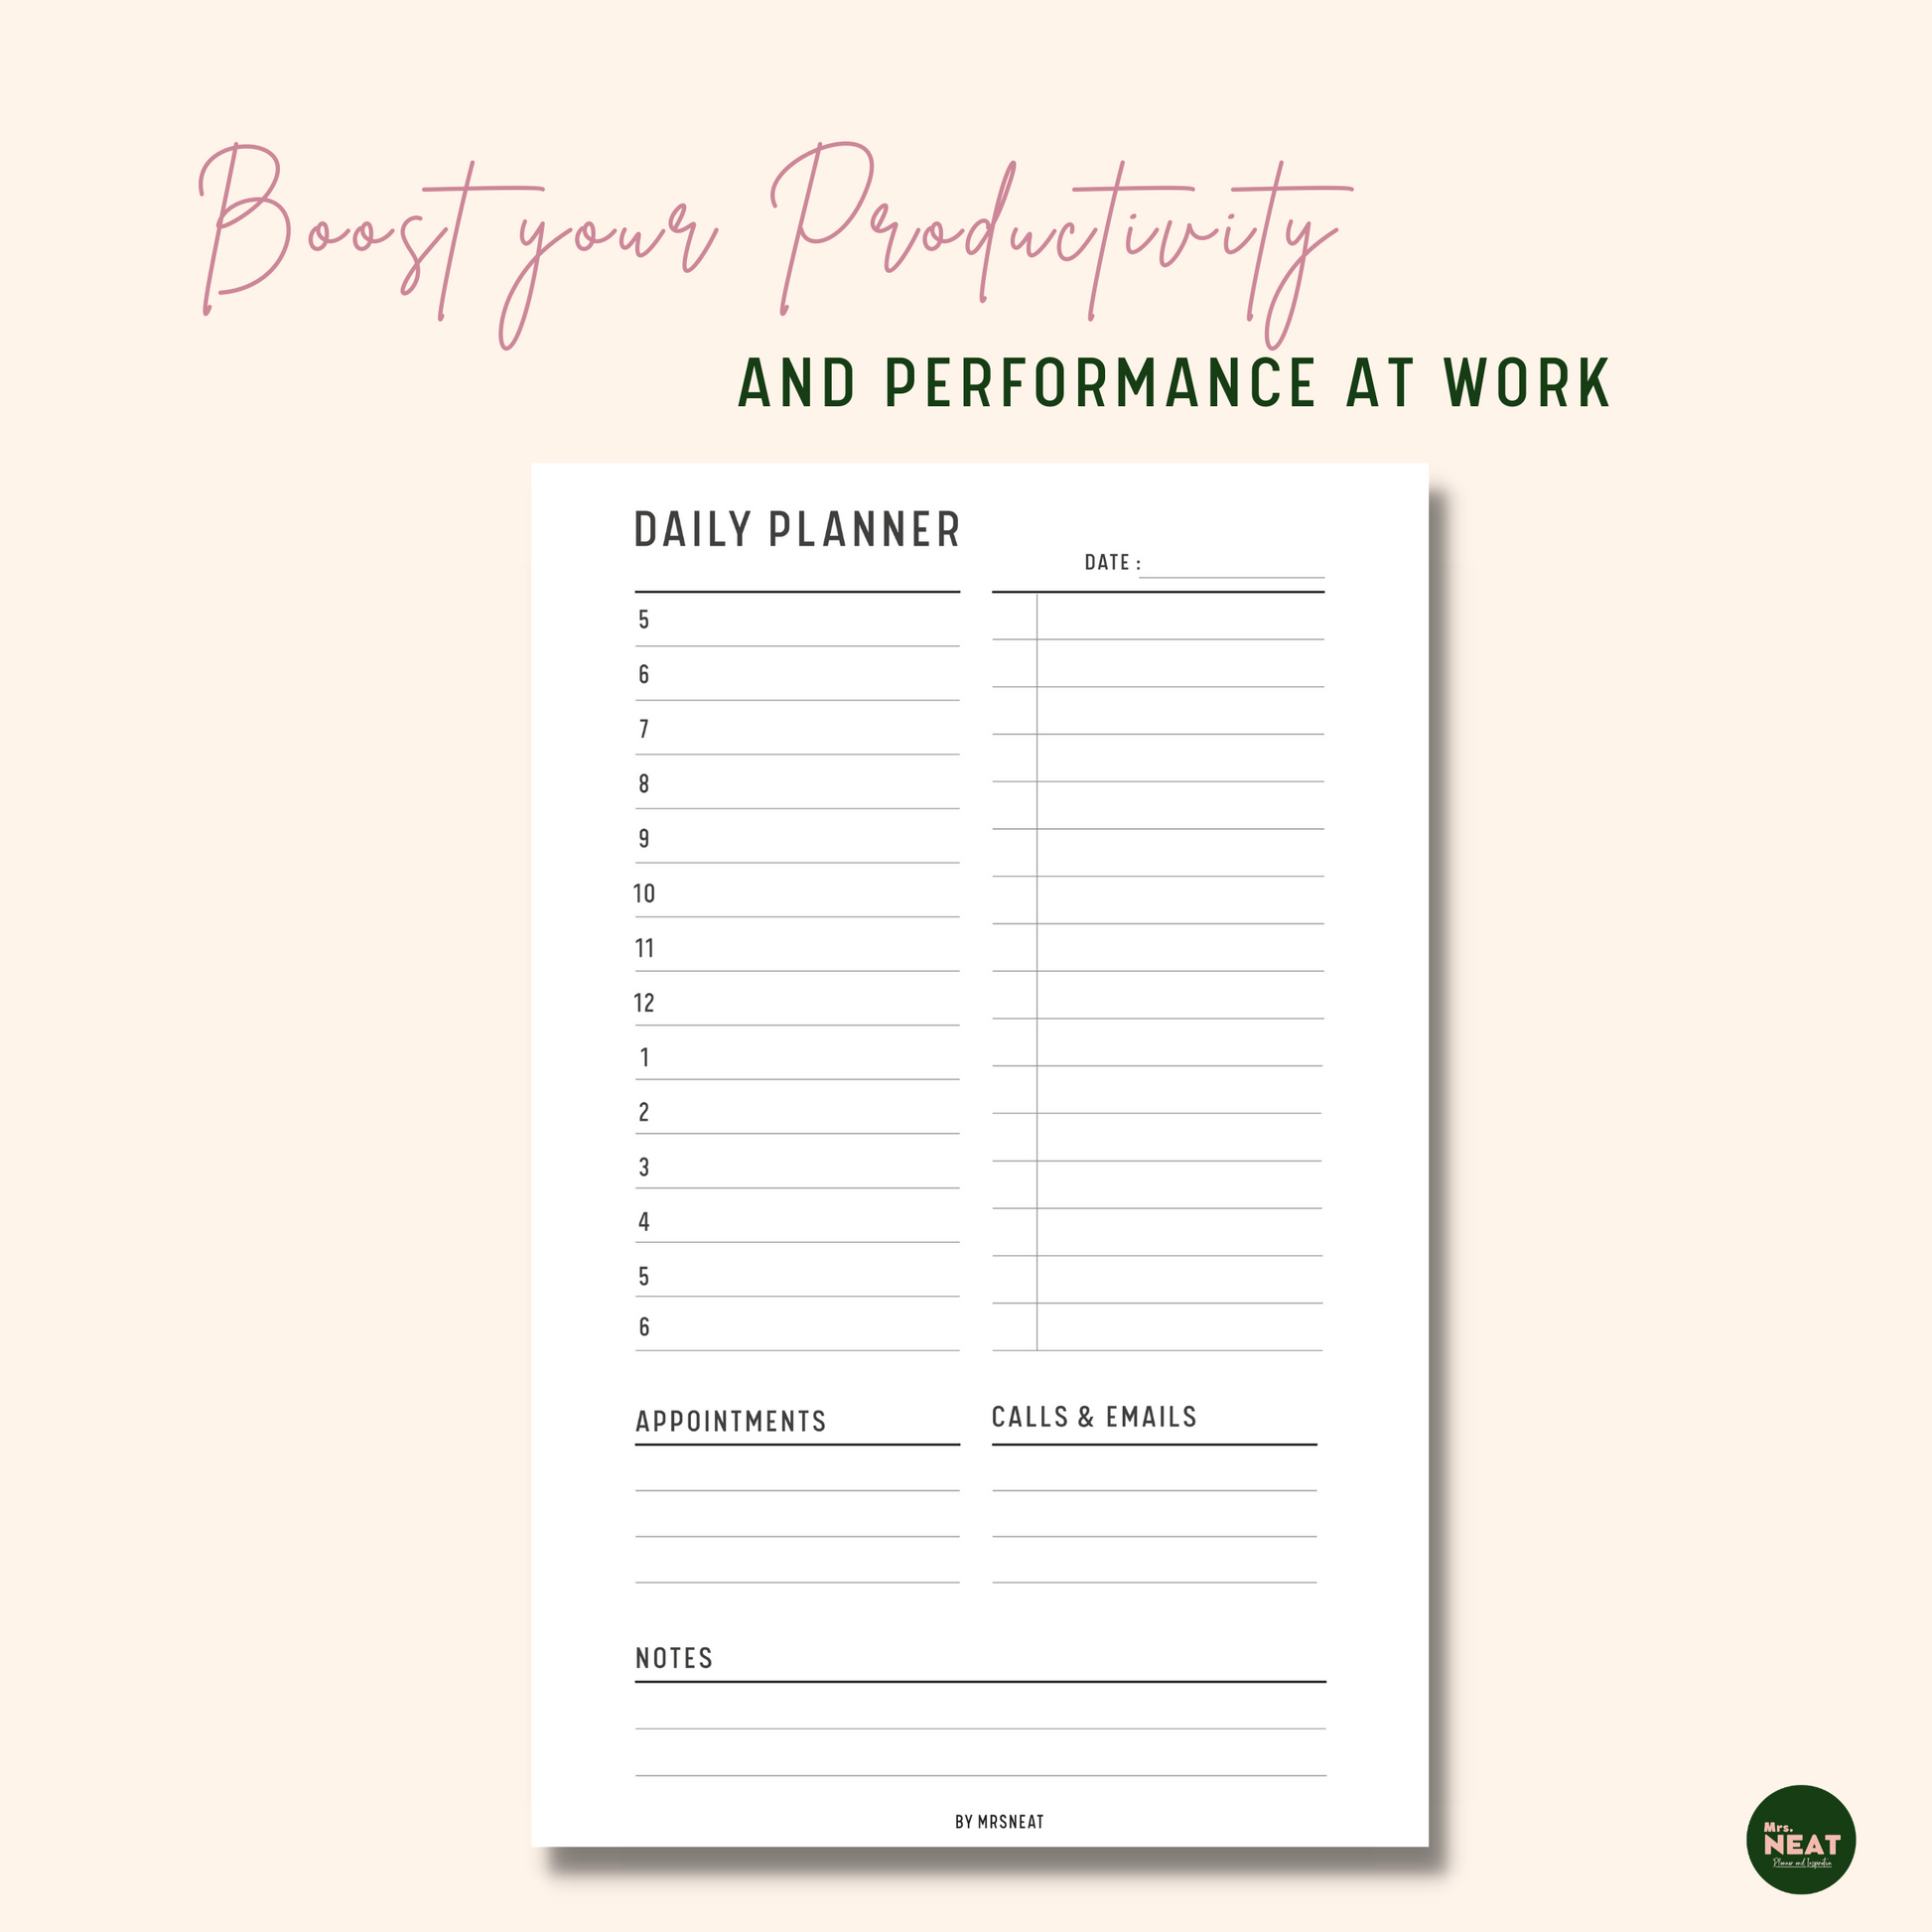 Productivity Daily Planner best for work needs